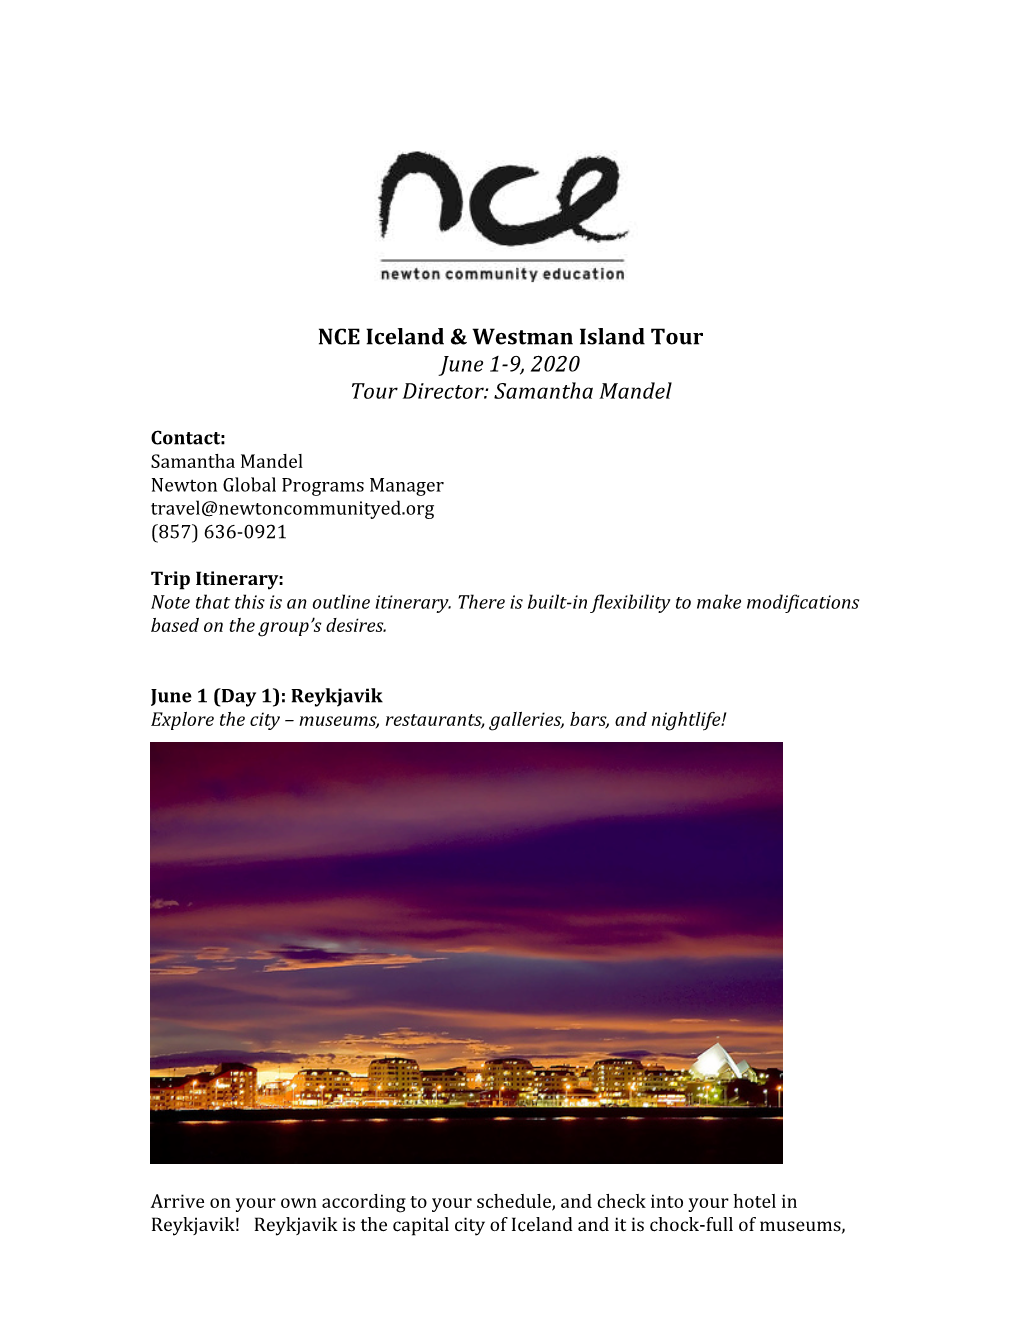 NCE Goes to Iceland